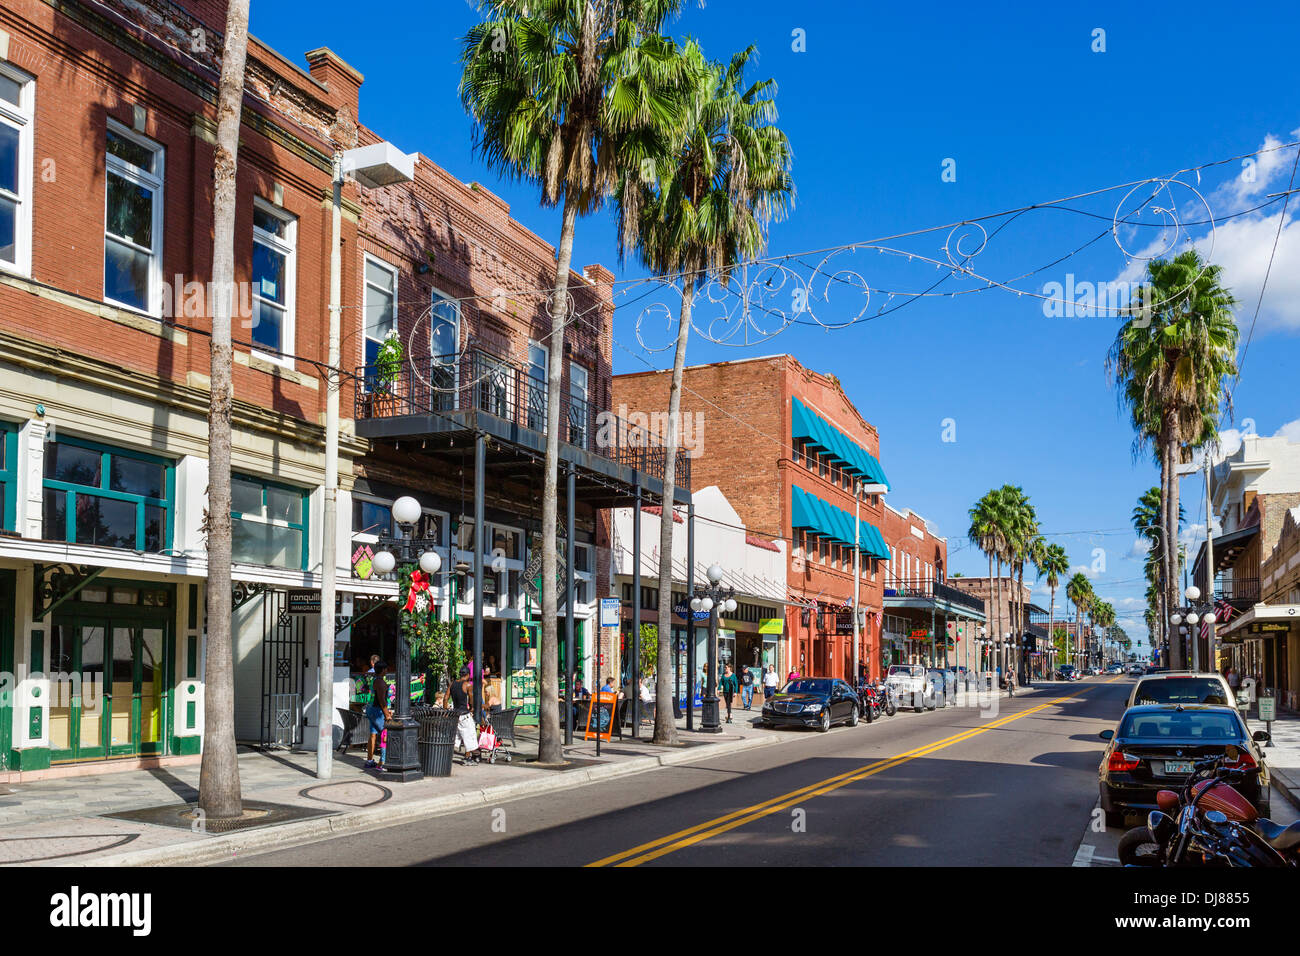 Shops, bars and restaurants on Seventh Avenue in historic Ybor City, Tampa, Florida, USA Stock Photo